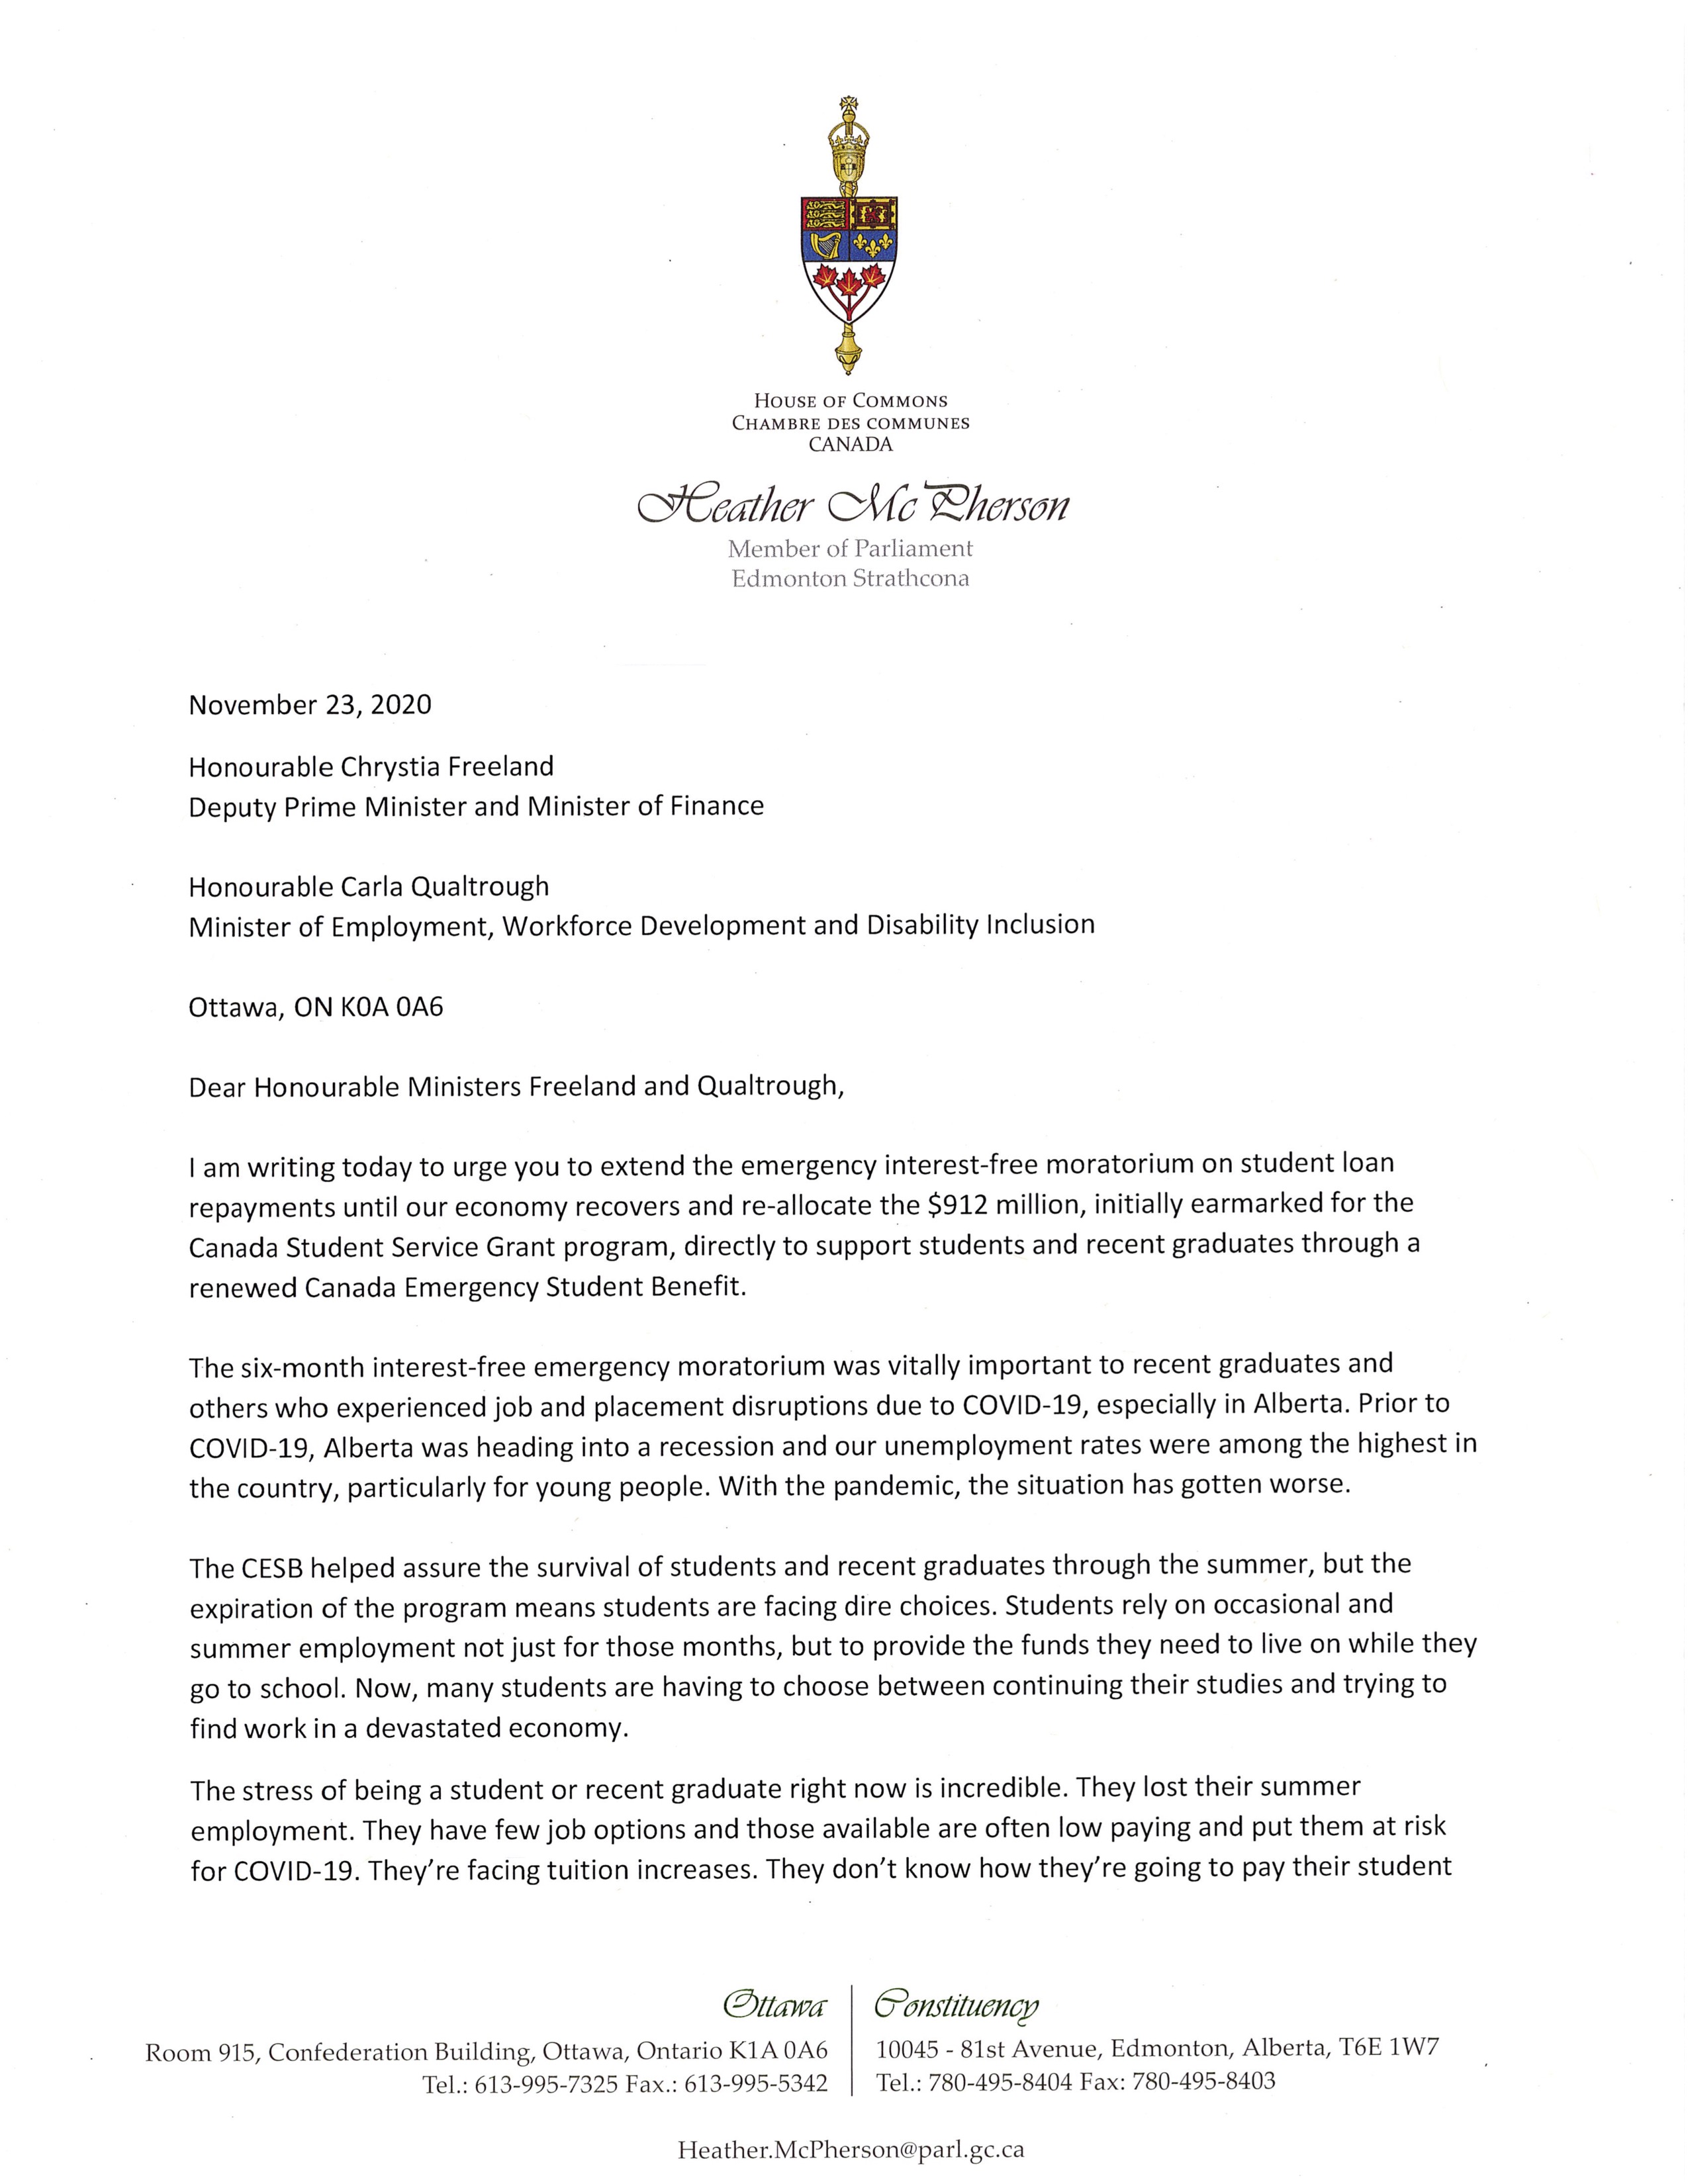 Letter to Ministers Freeland and Qualtrough Page 1